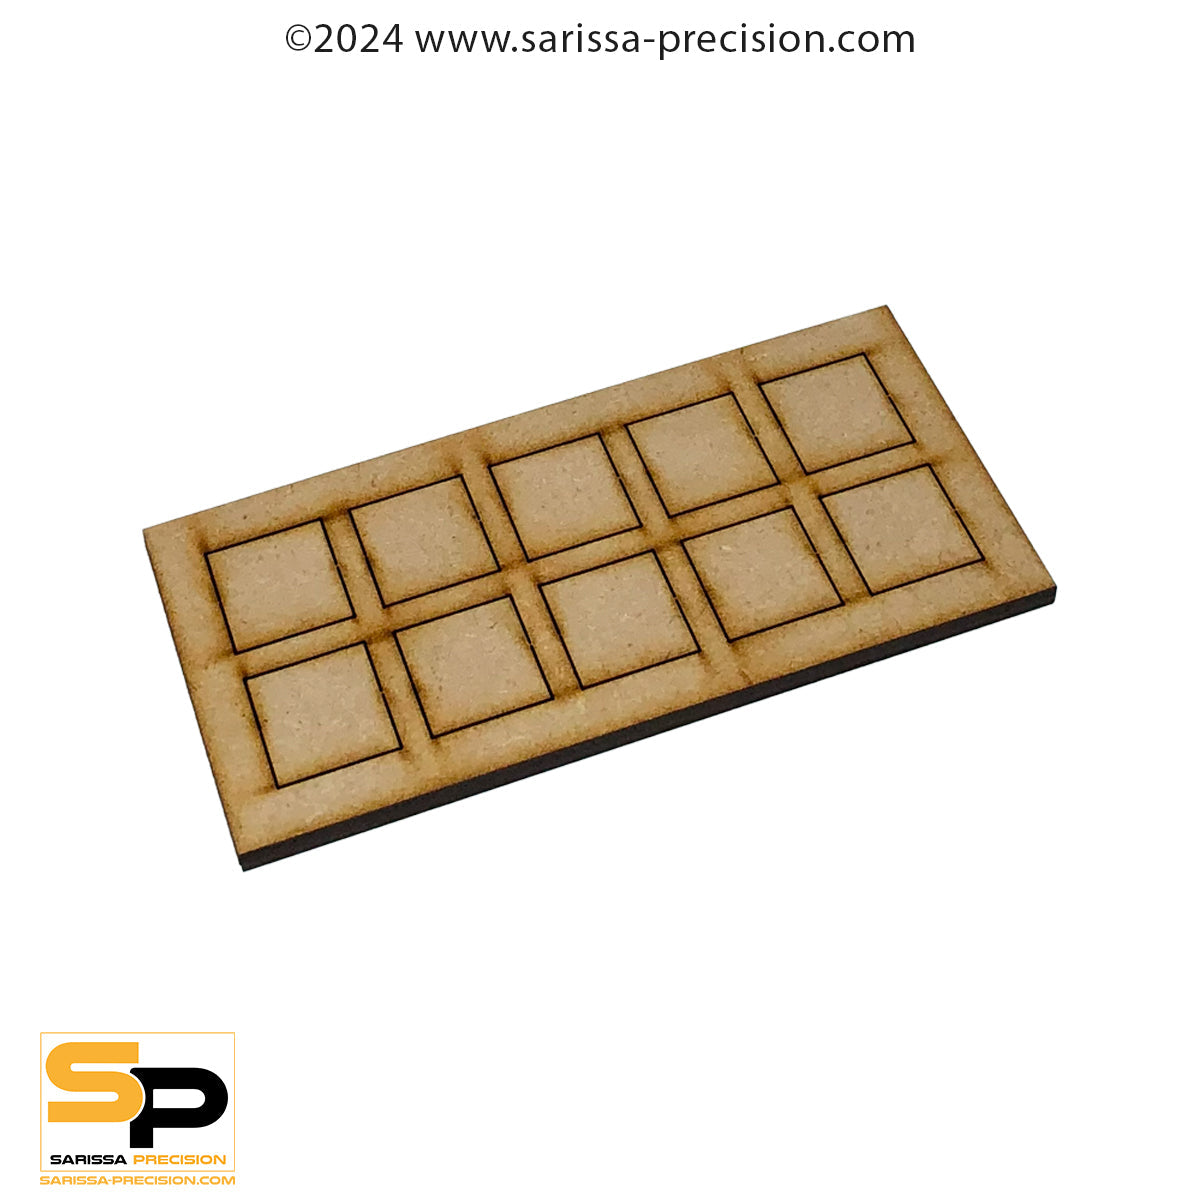 14x6 25x25mm Conversion Tray for 20x20mm bases